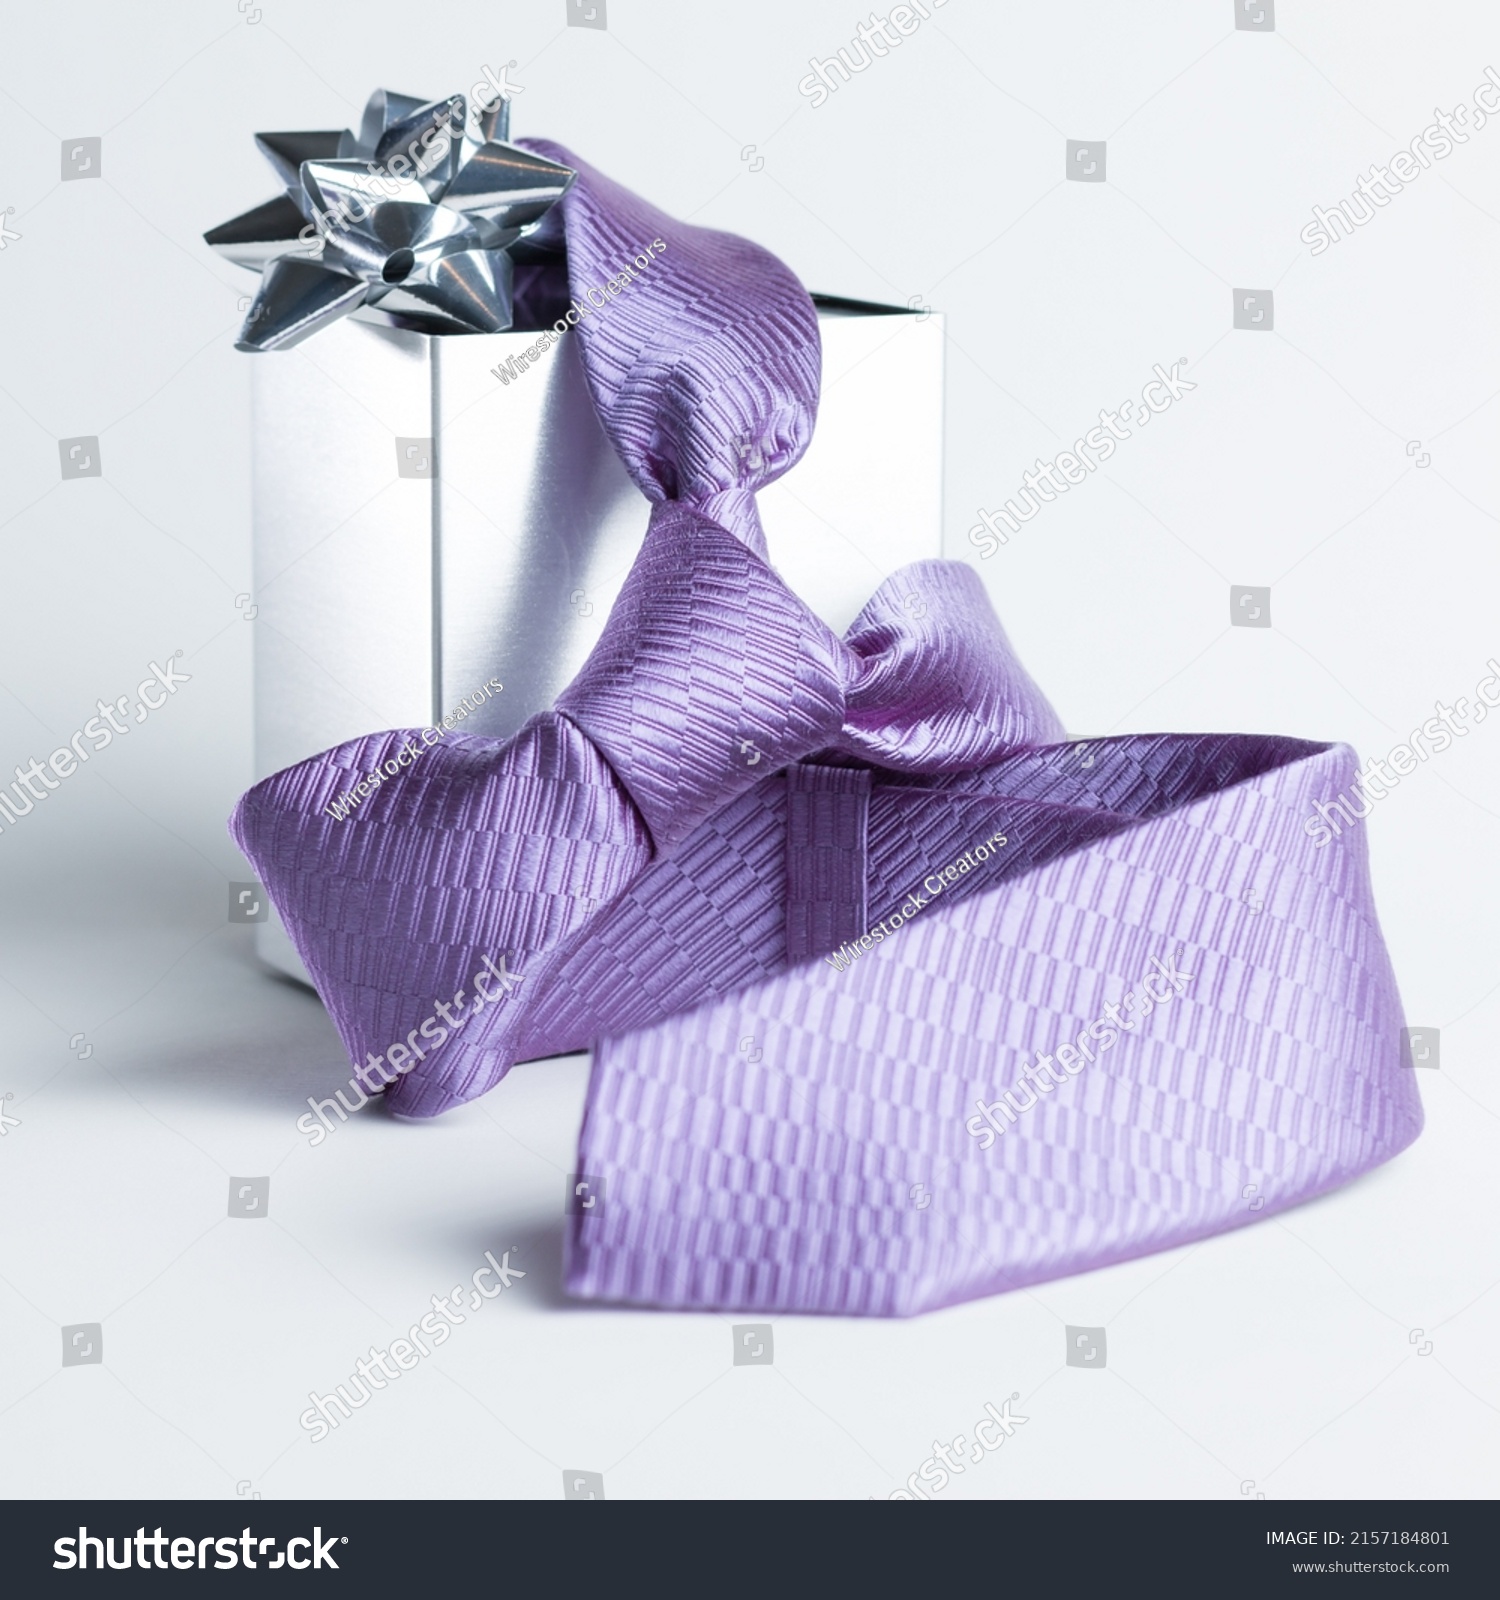 The representation of Father's Day with still life - tie and gift box #2157184801